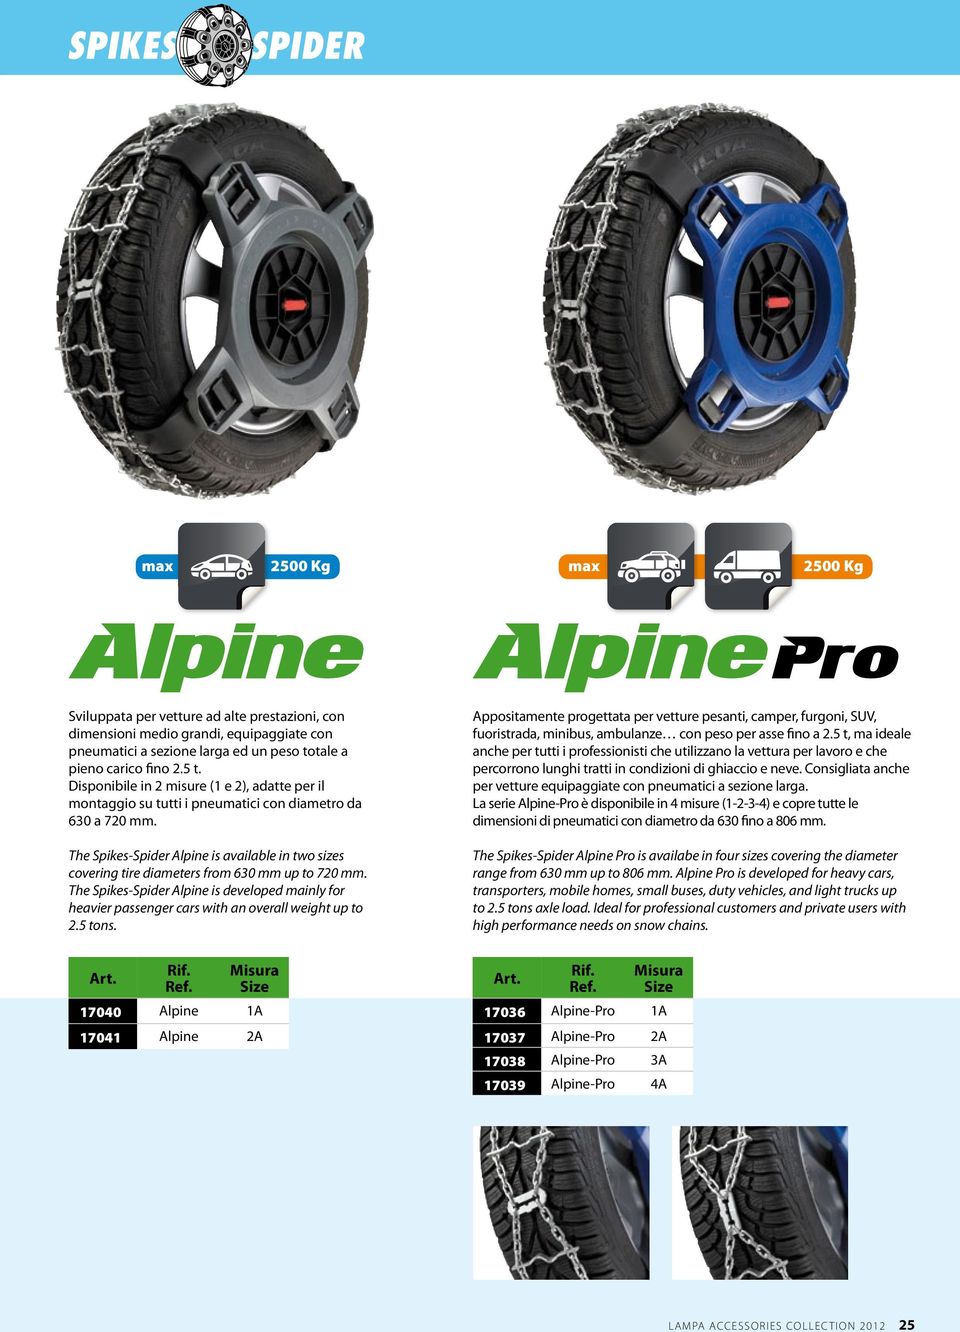 The Spikes-Spider Alpine is available in two sizes covering tire diameters from 630 mm up to 720 mm.